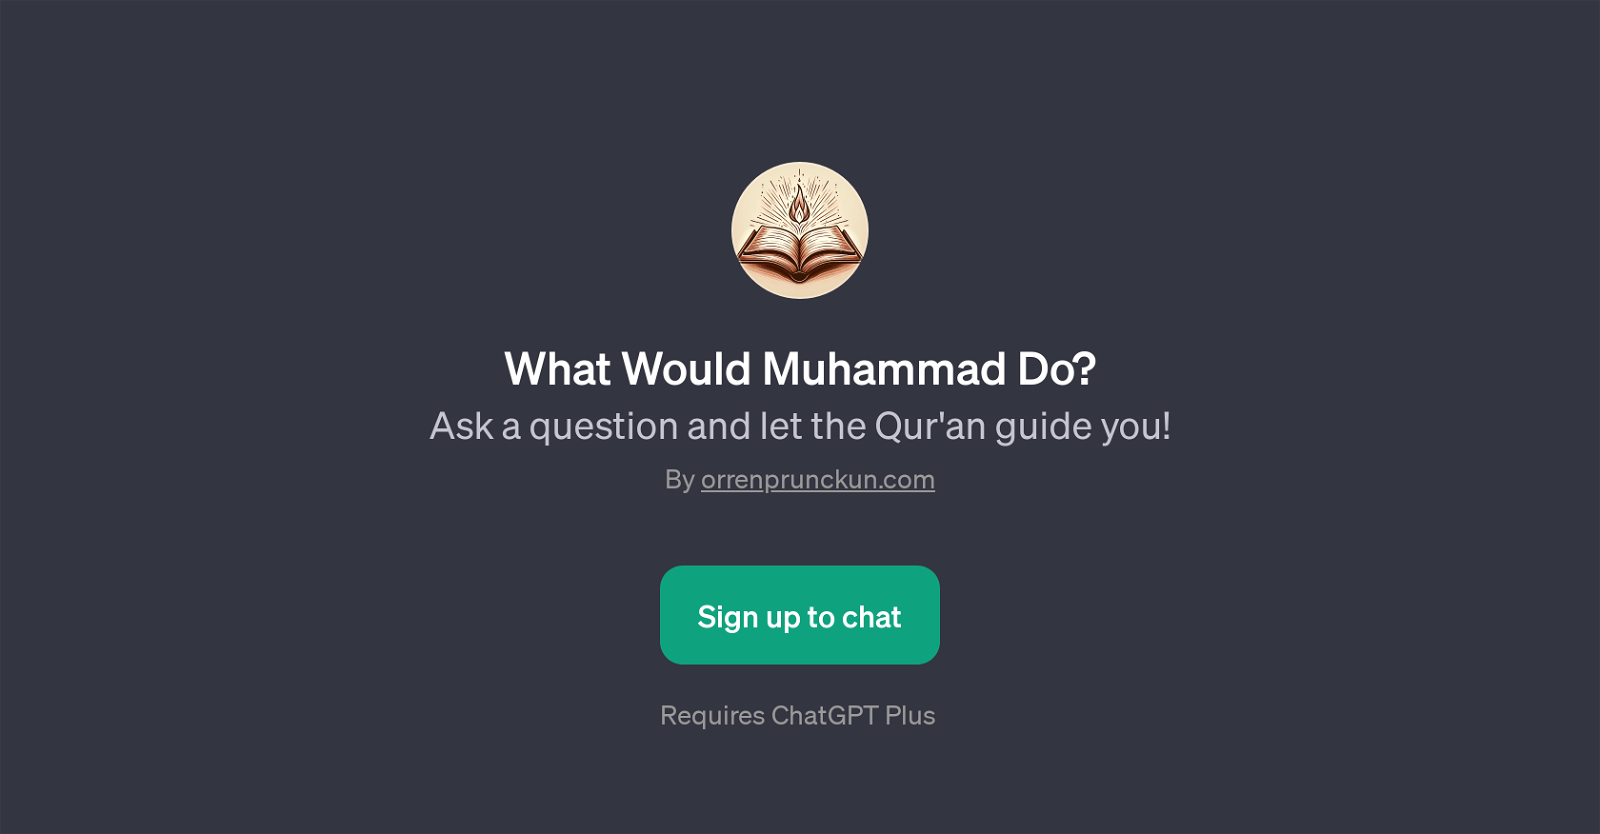 What Would Muhammad Do? website